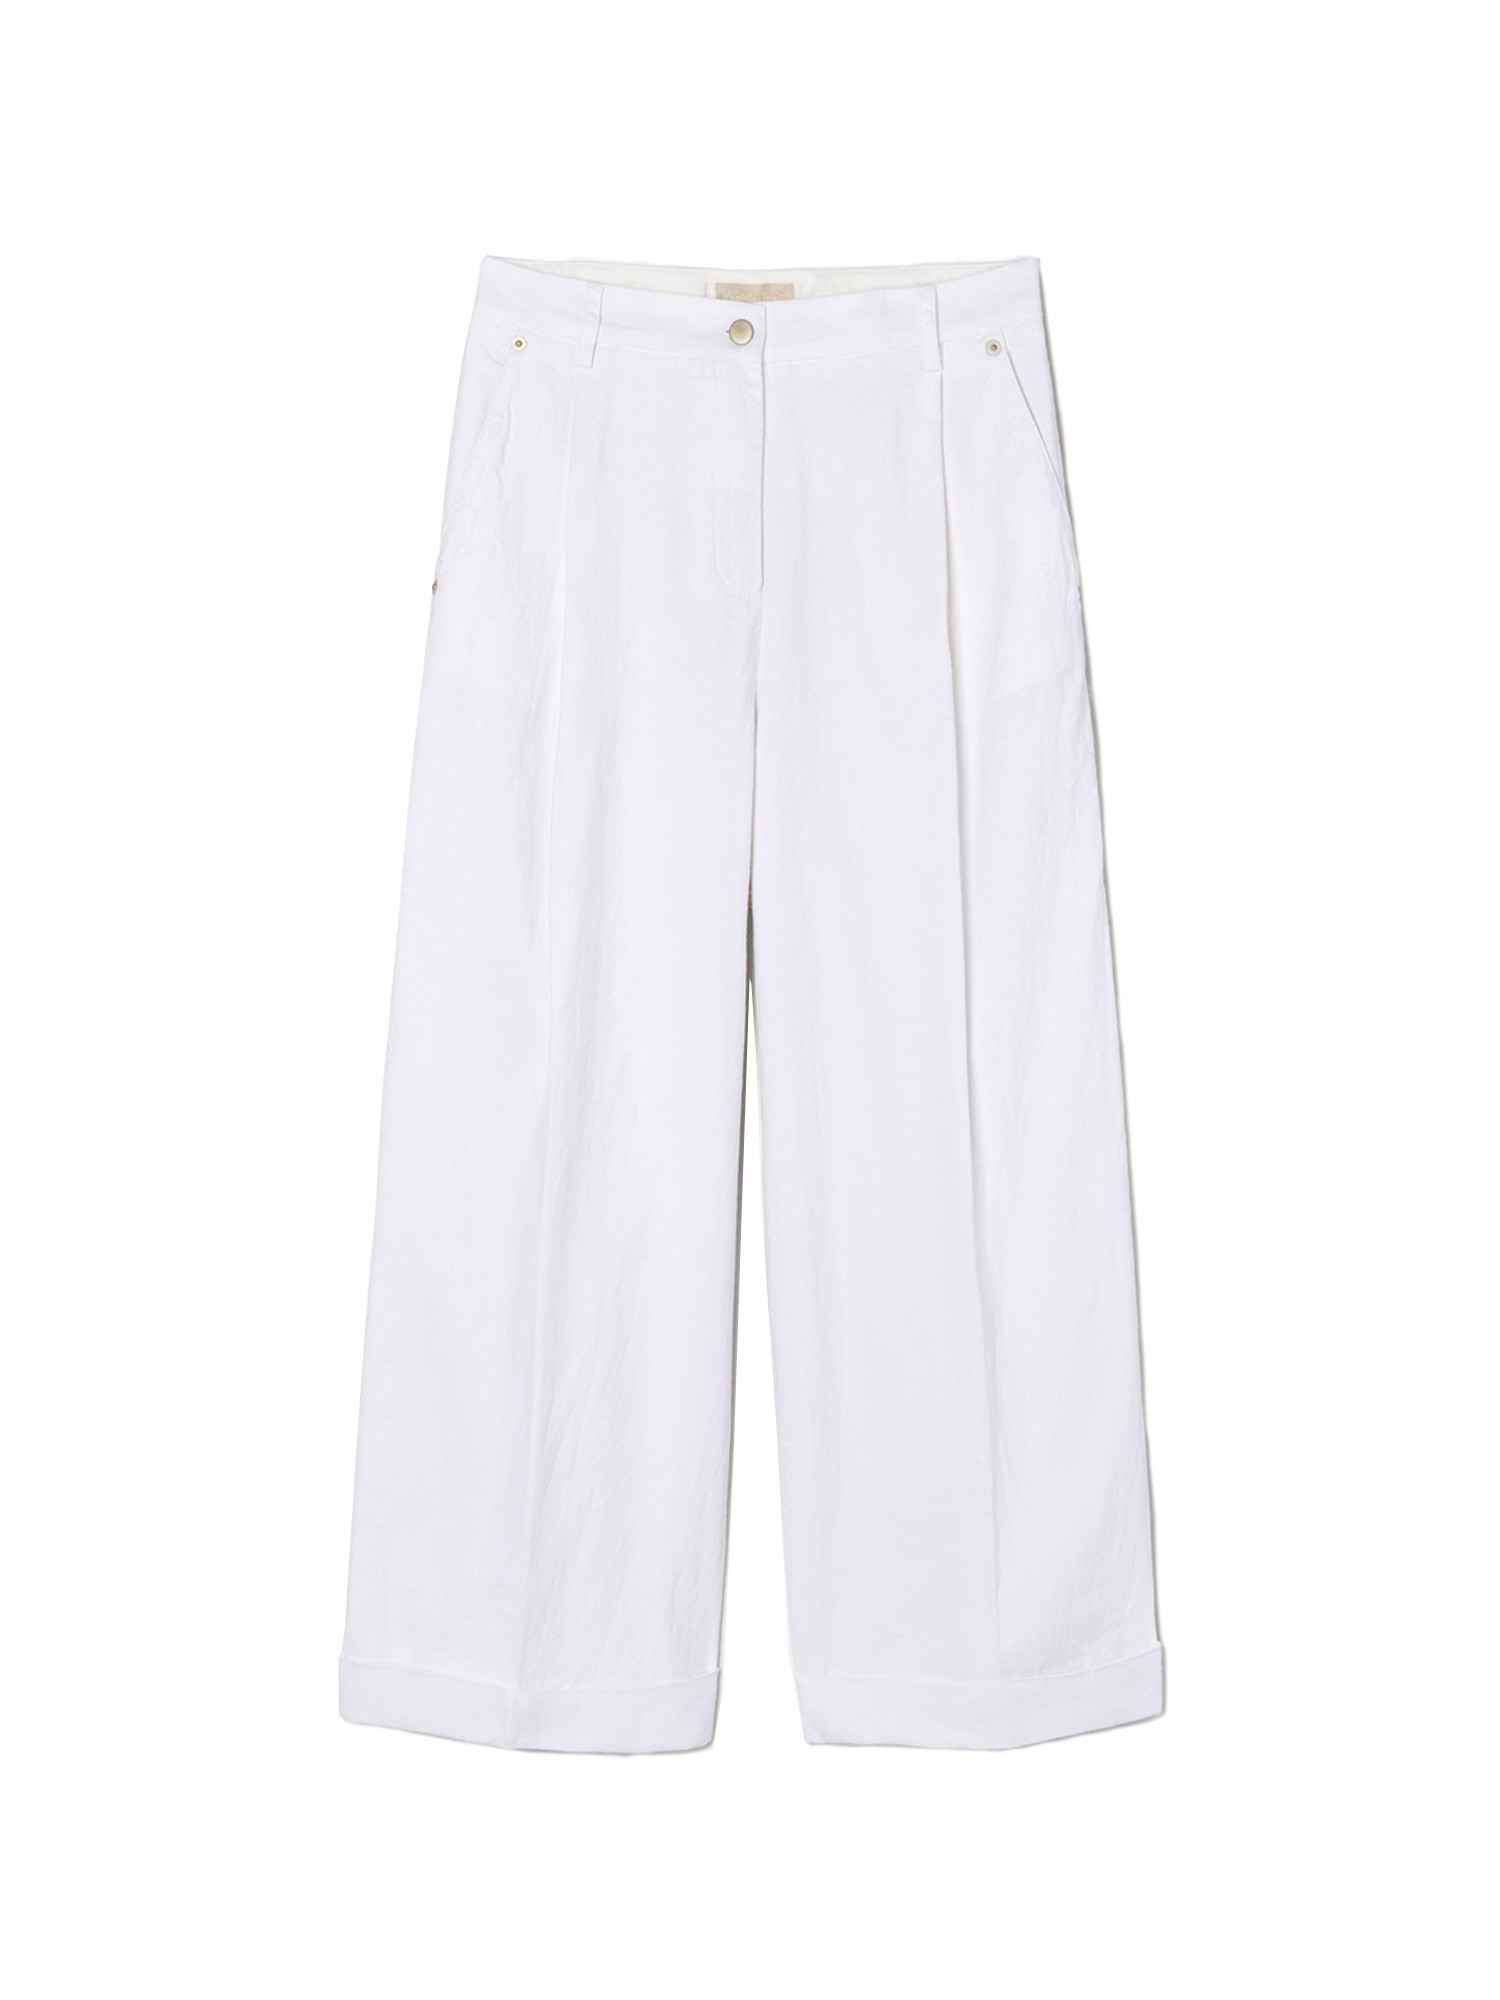 Momonì - Grecale pants in light stretch denim, White, large image number 0